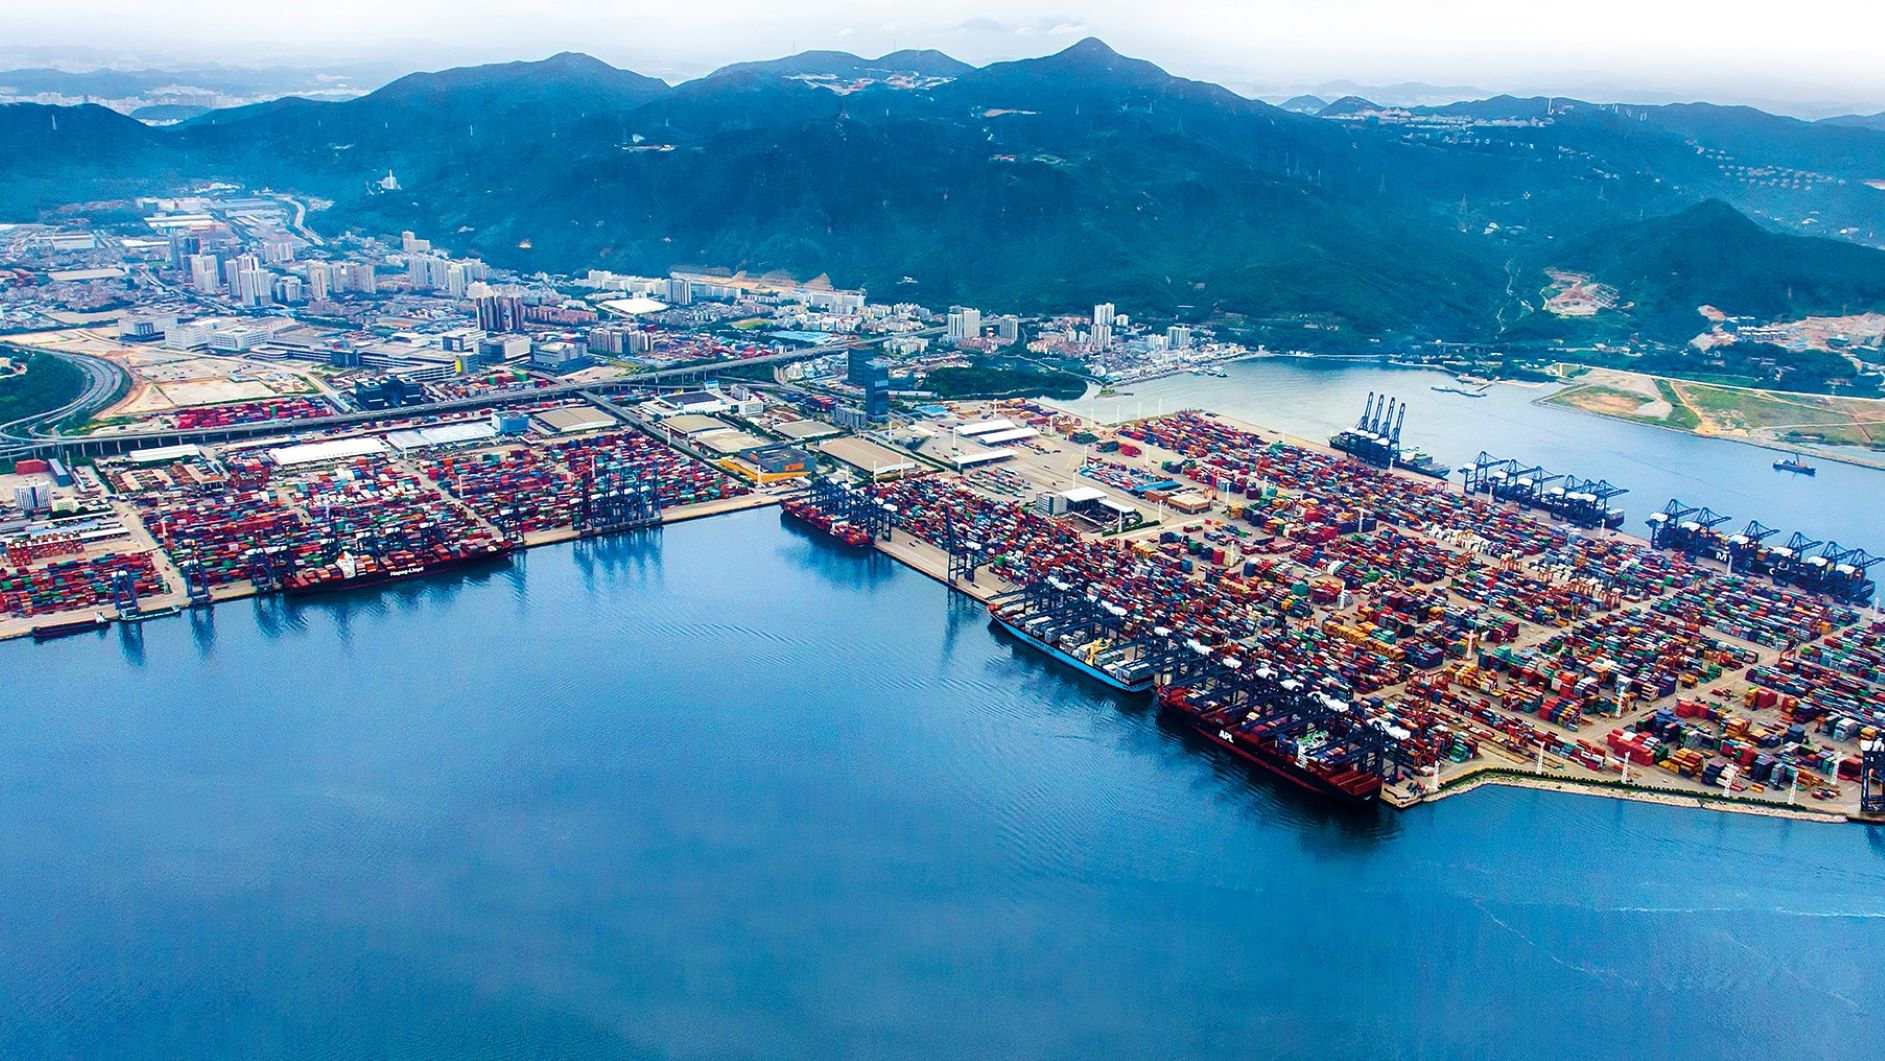 Aerial view of the Port of Yantian in Shenzhen, China, with lots of containers stacked on the wharf.